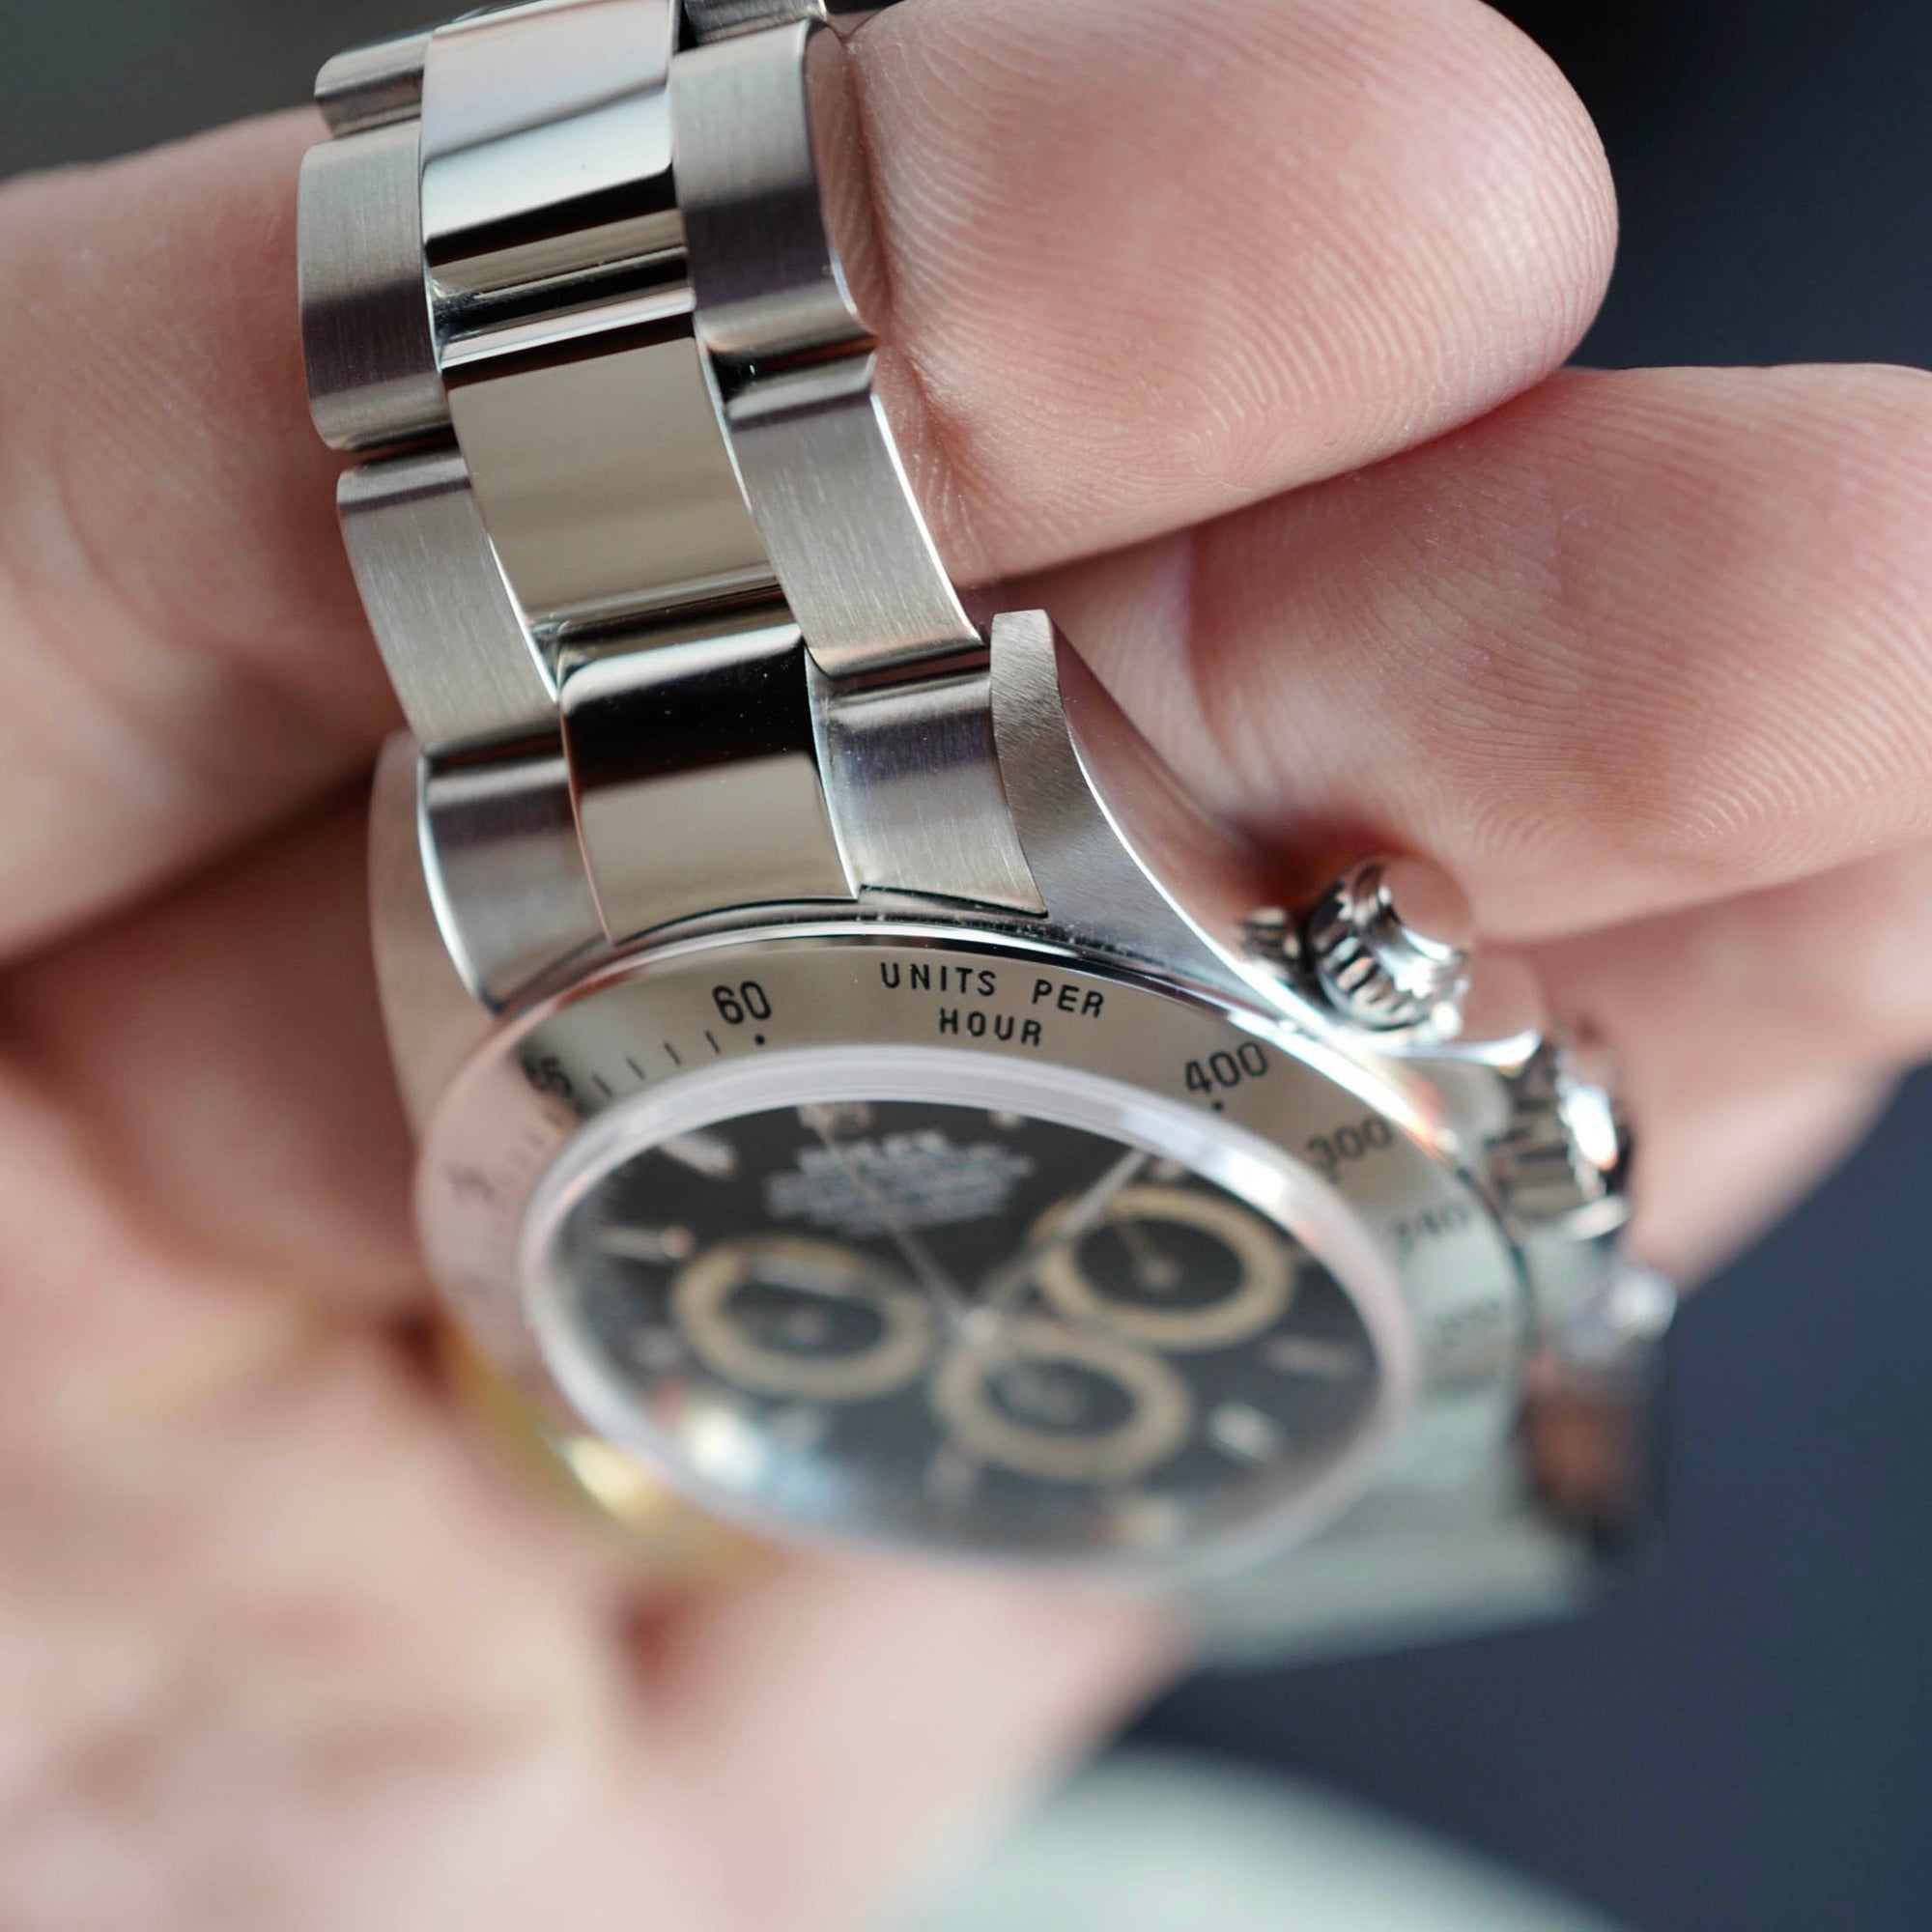 Rolex - Rolex Steel Zenith Daytona Ref. 16520 in New Old Stock Condition with Papers (NEW ARRIVAL) - The Keystone Watches